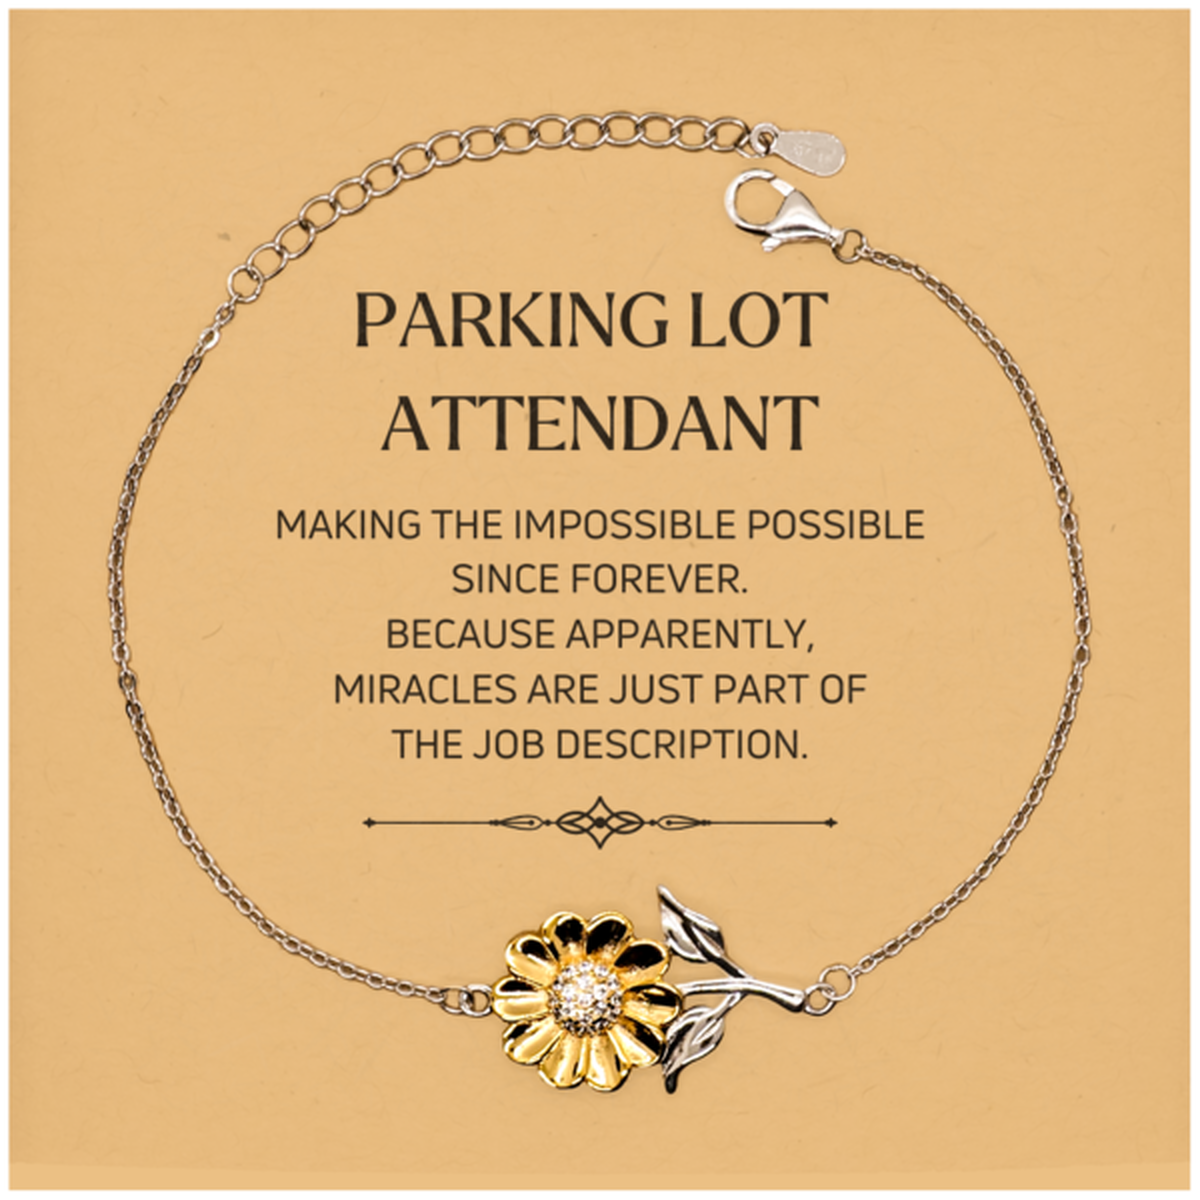 Funny Parking Lot Attendant Gifts, Miracles are just part of the job description, Inspirational Birthday Christmas Sunflower Bracelet For Parking Lot Attendant, Men, Women, Coworkers, Friends, Boss